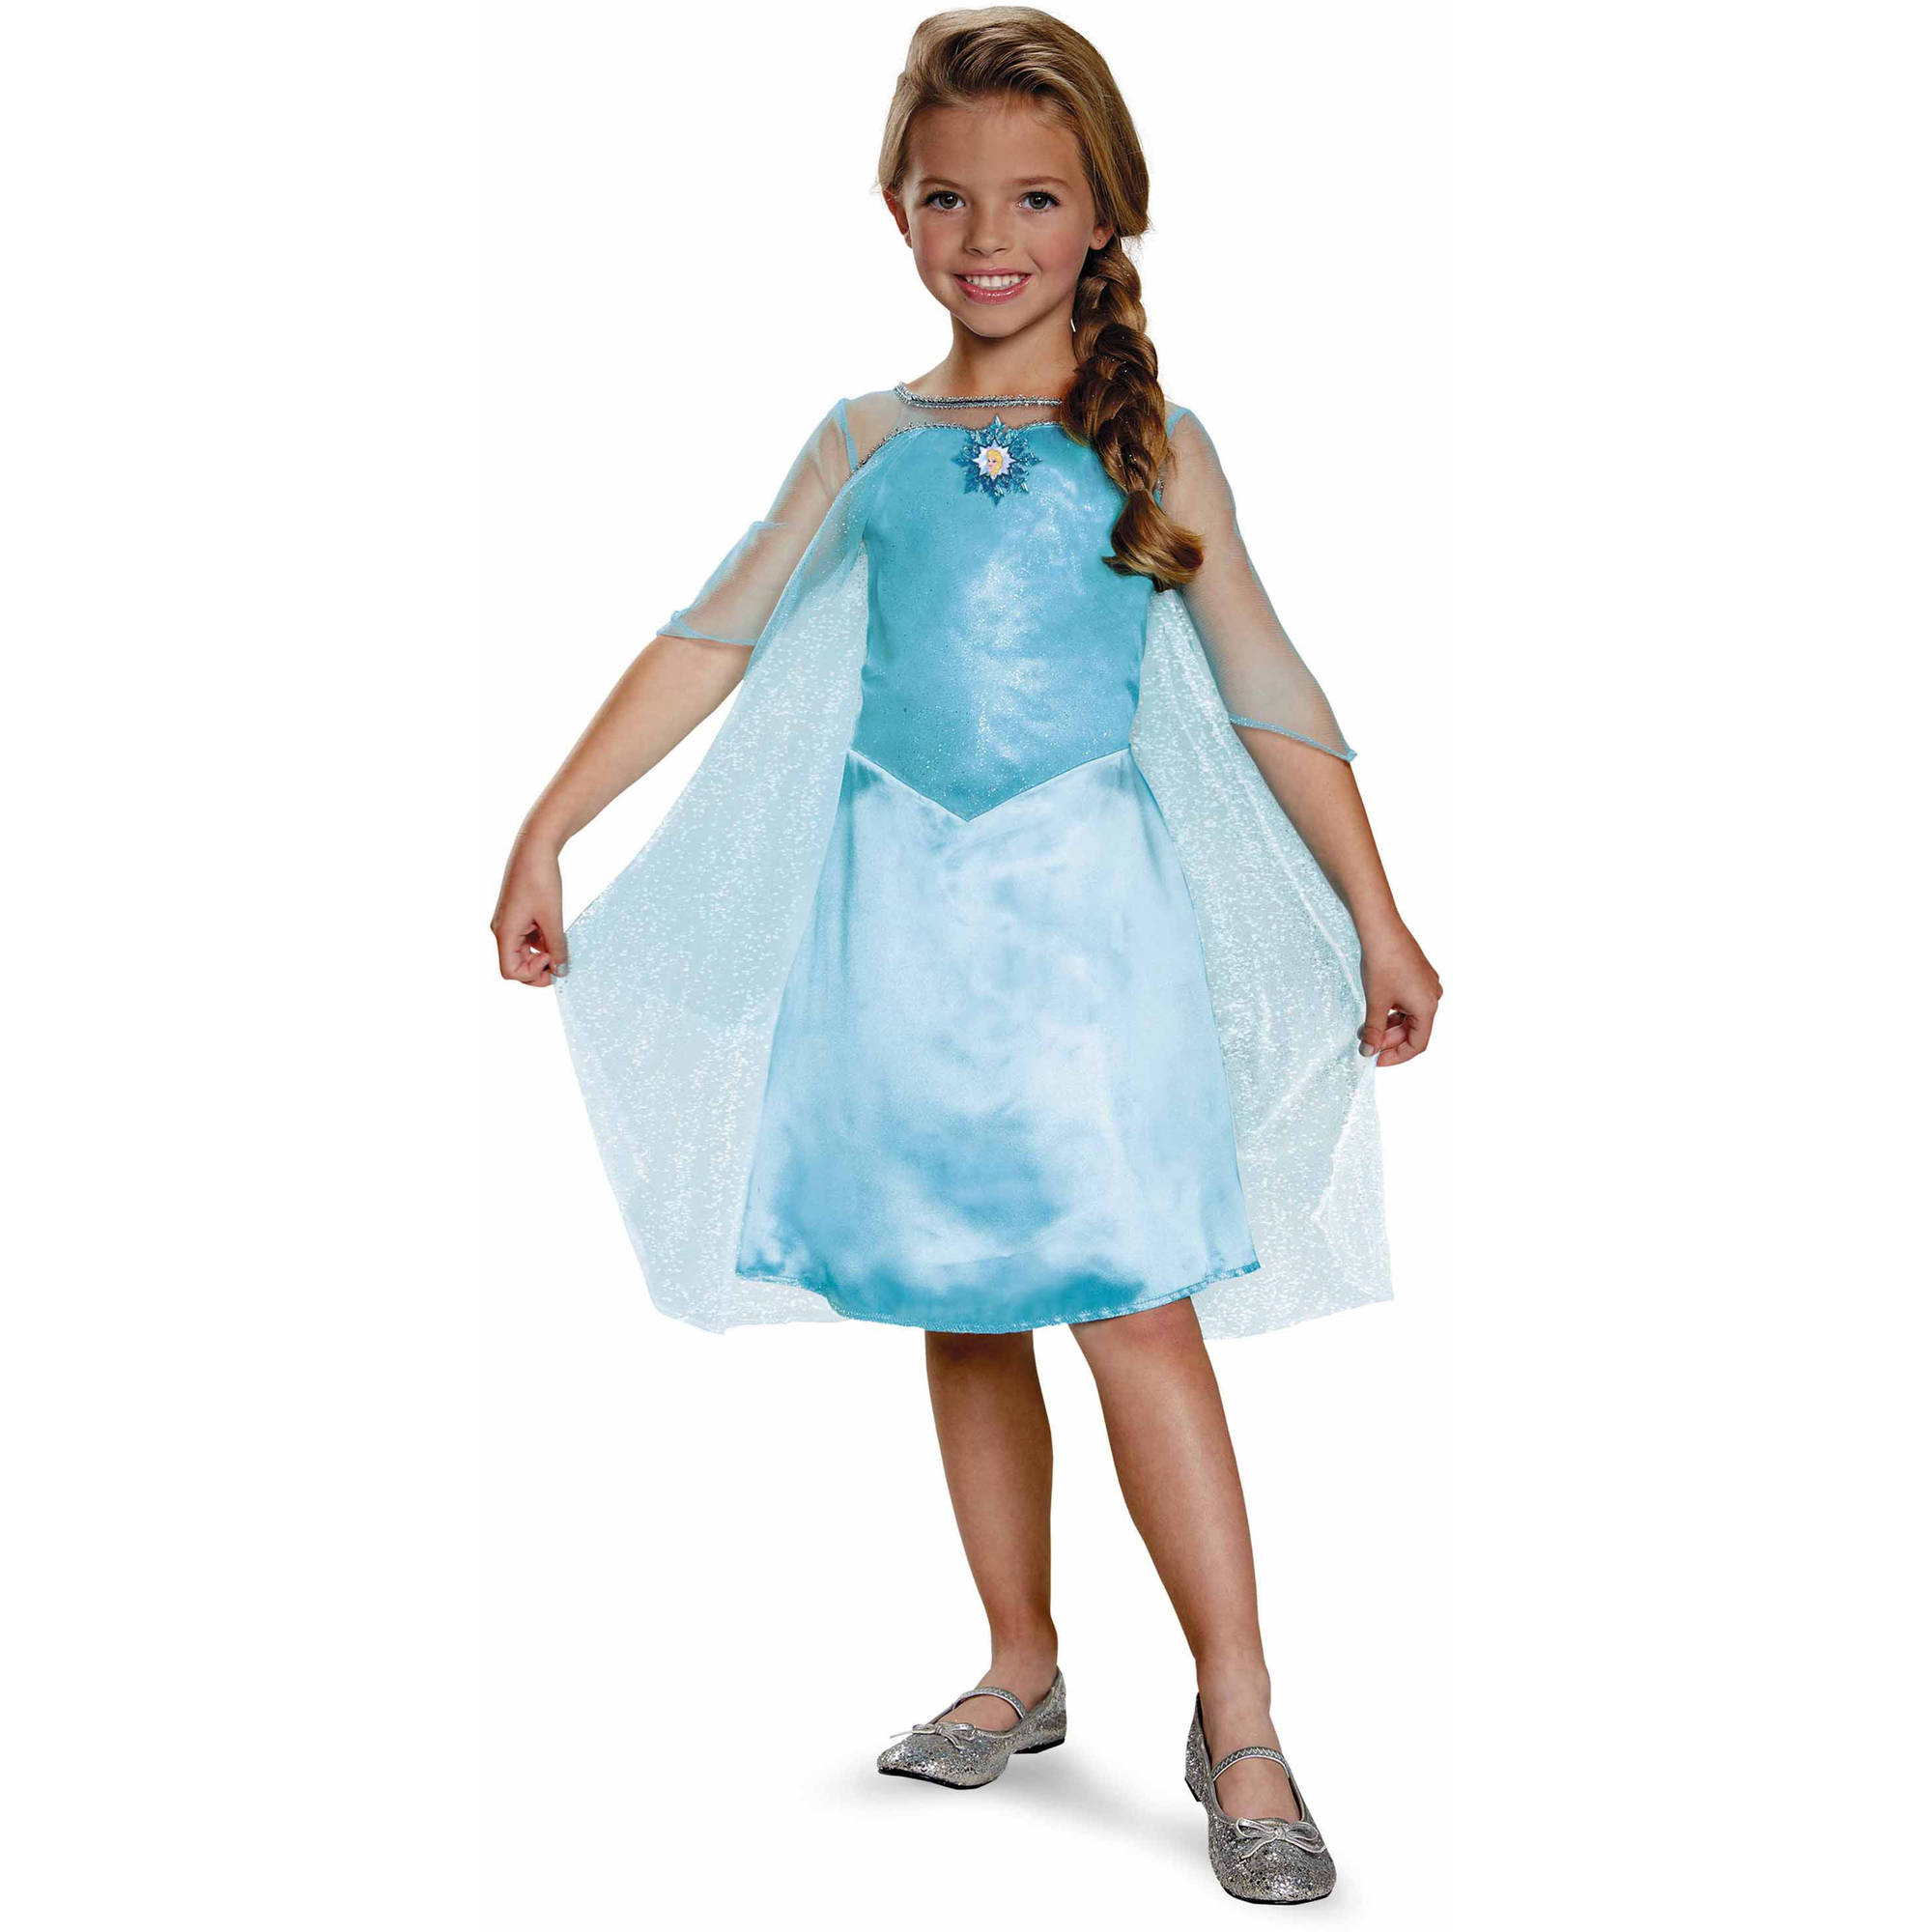 Frozen Elsa Basic Child Dress Up / Role Play Costume, Small Halloween Costume - image 1 of 2